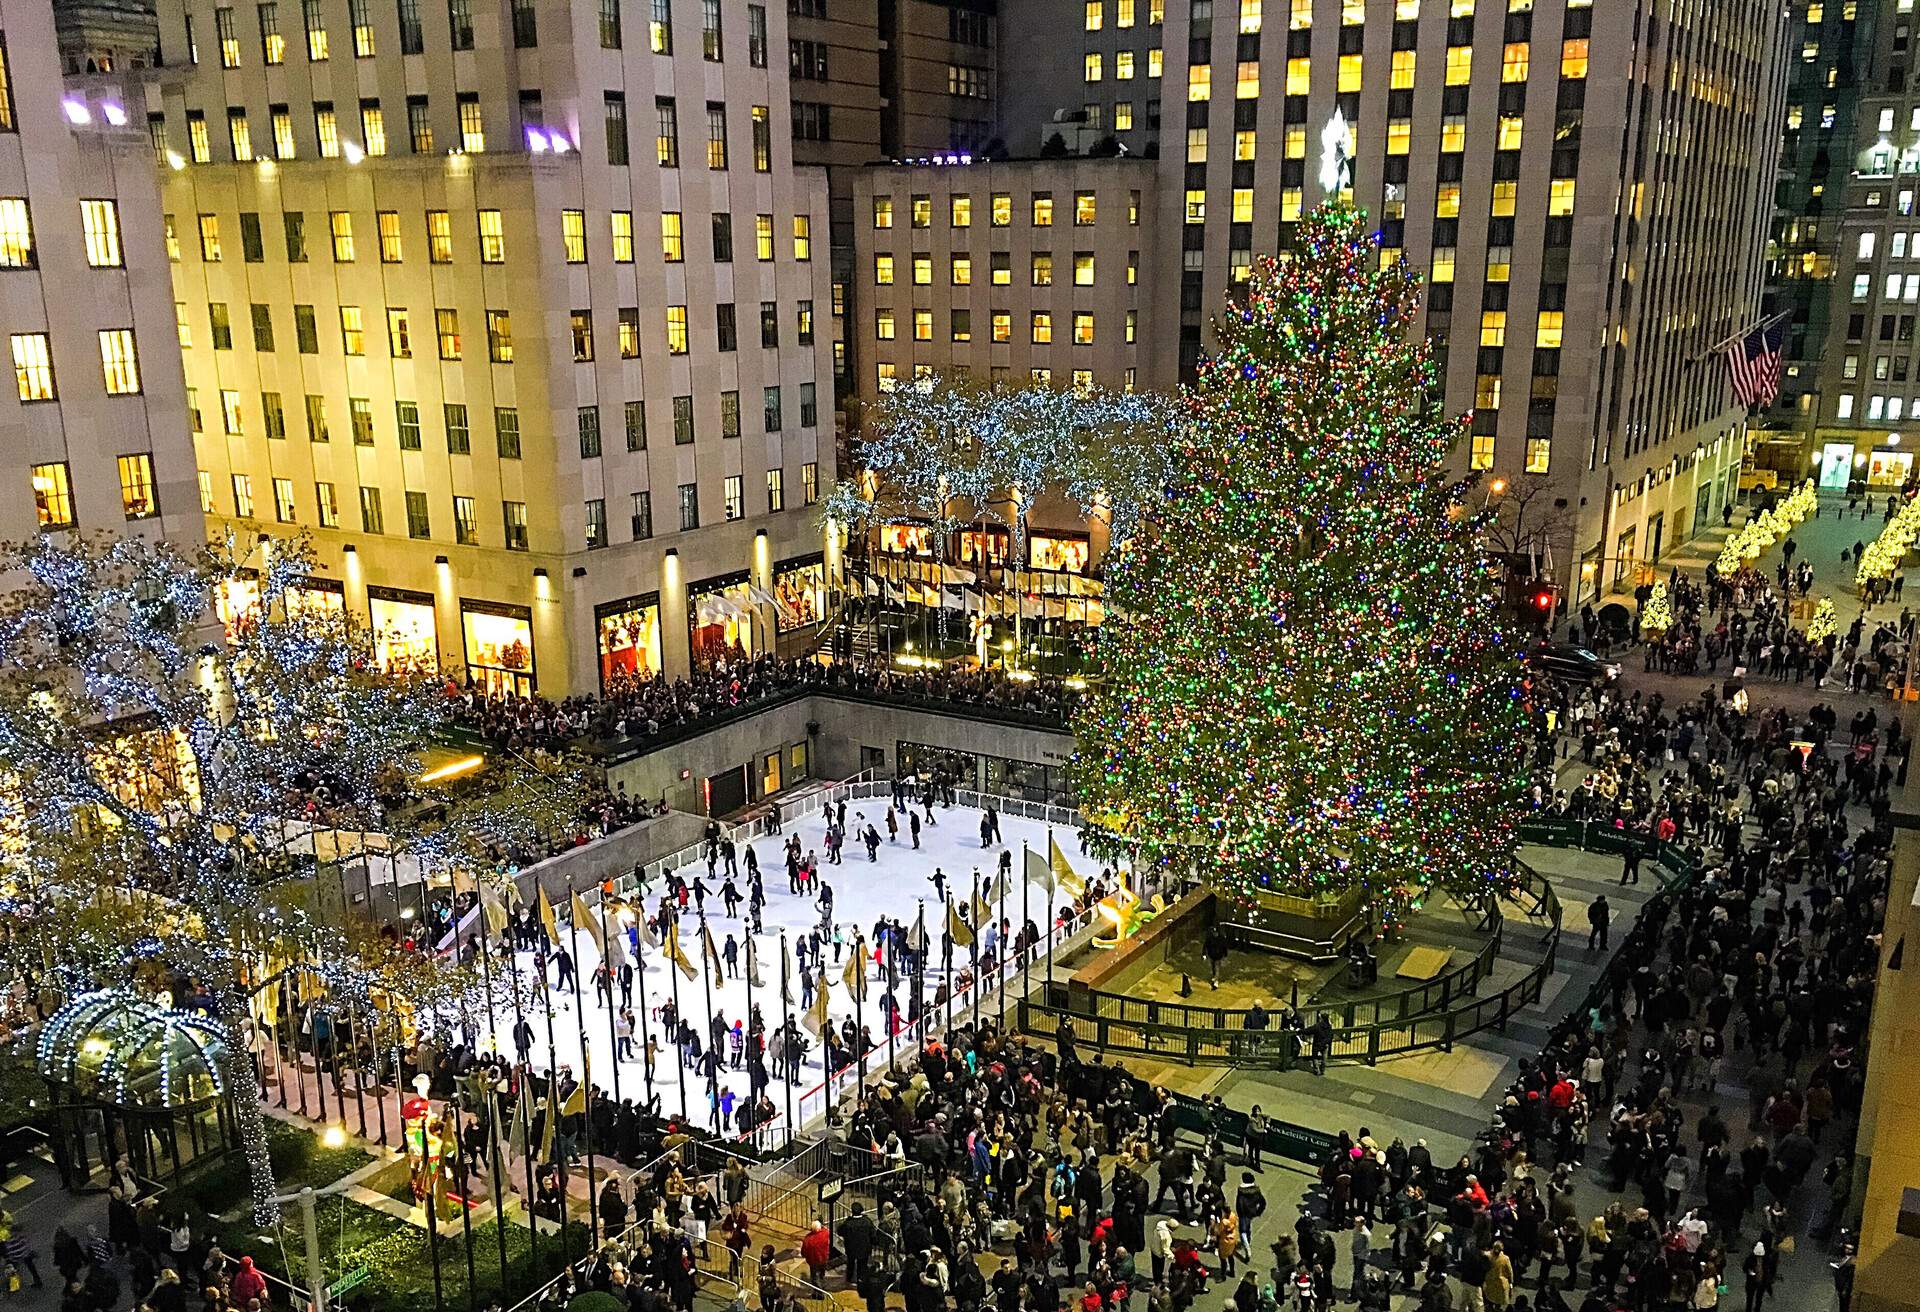 DEST_USA_NYC_NEW-YORK-CITY_ROCKEFELLER-CENTER_CHRISTMAS_GettyImages-623608524